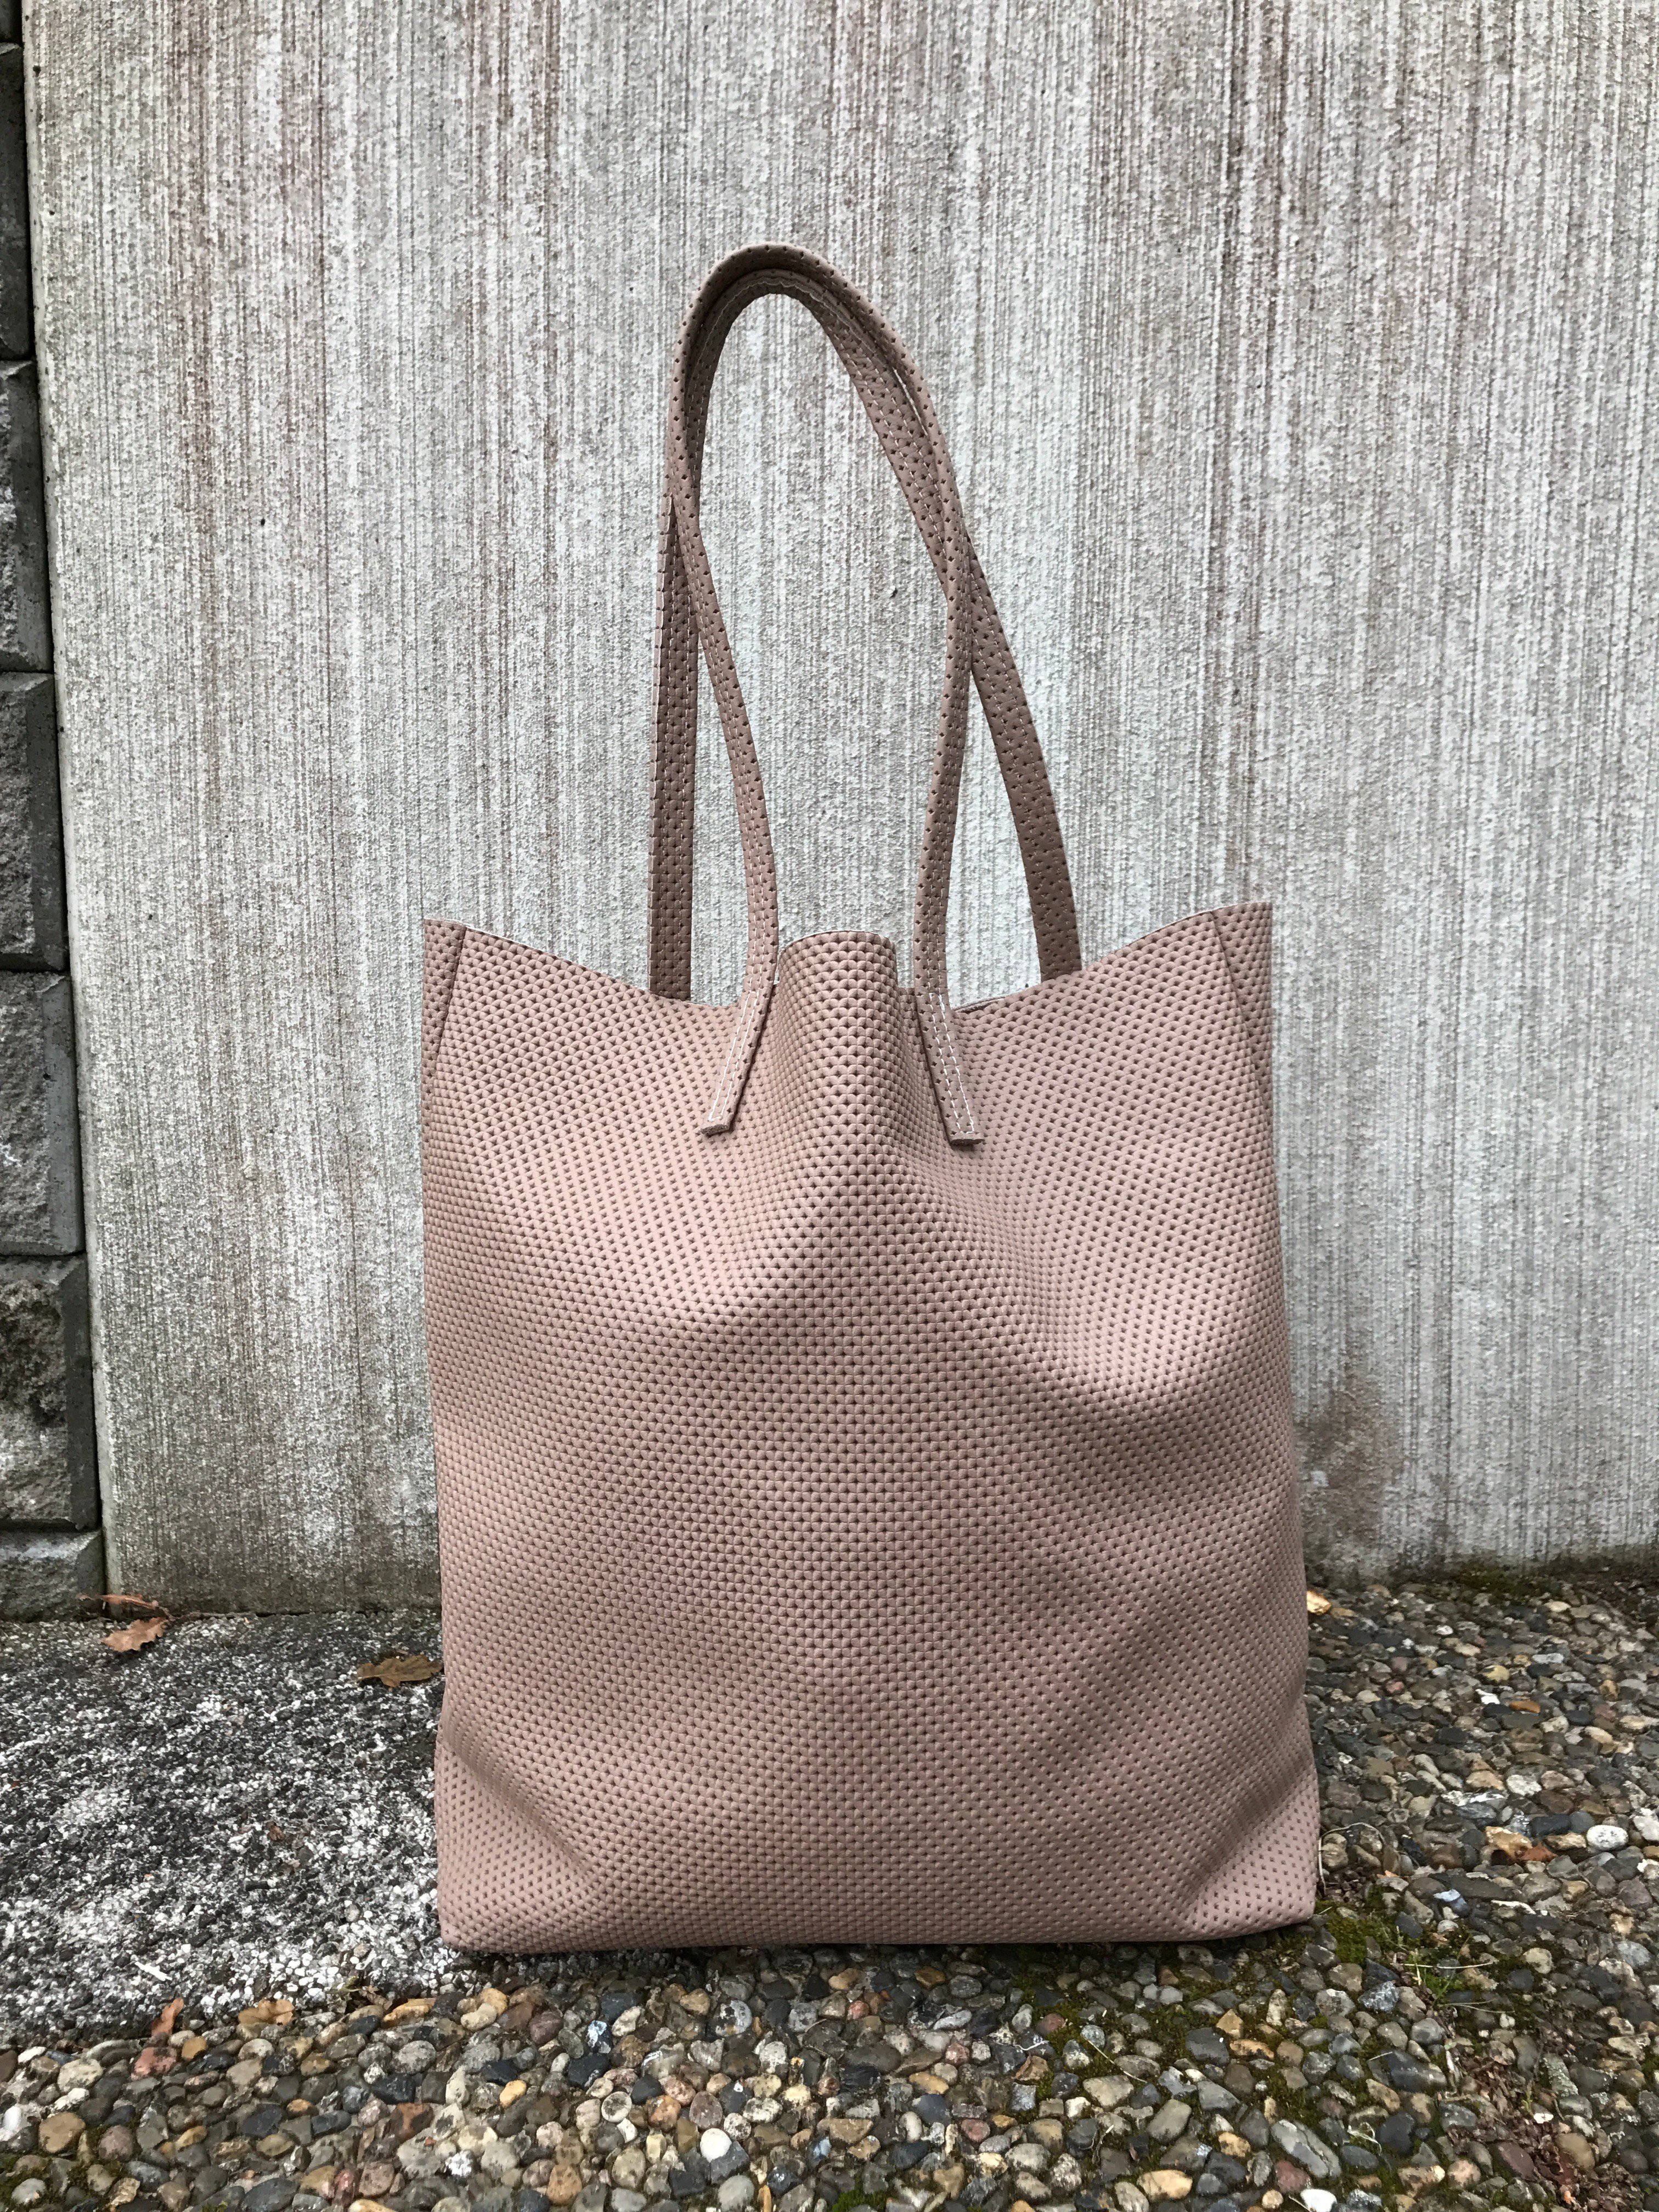 Raw Leather Tote Bag - Light Taupe Perforated